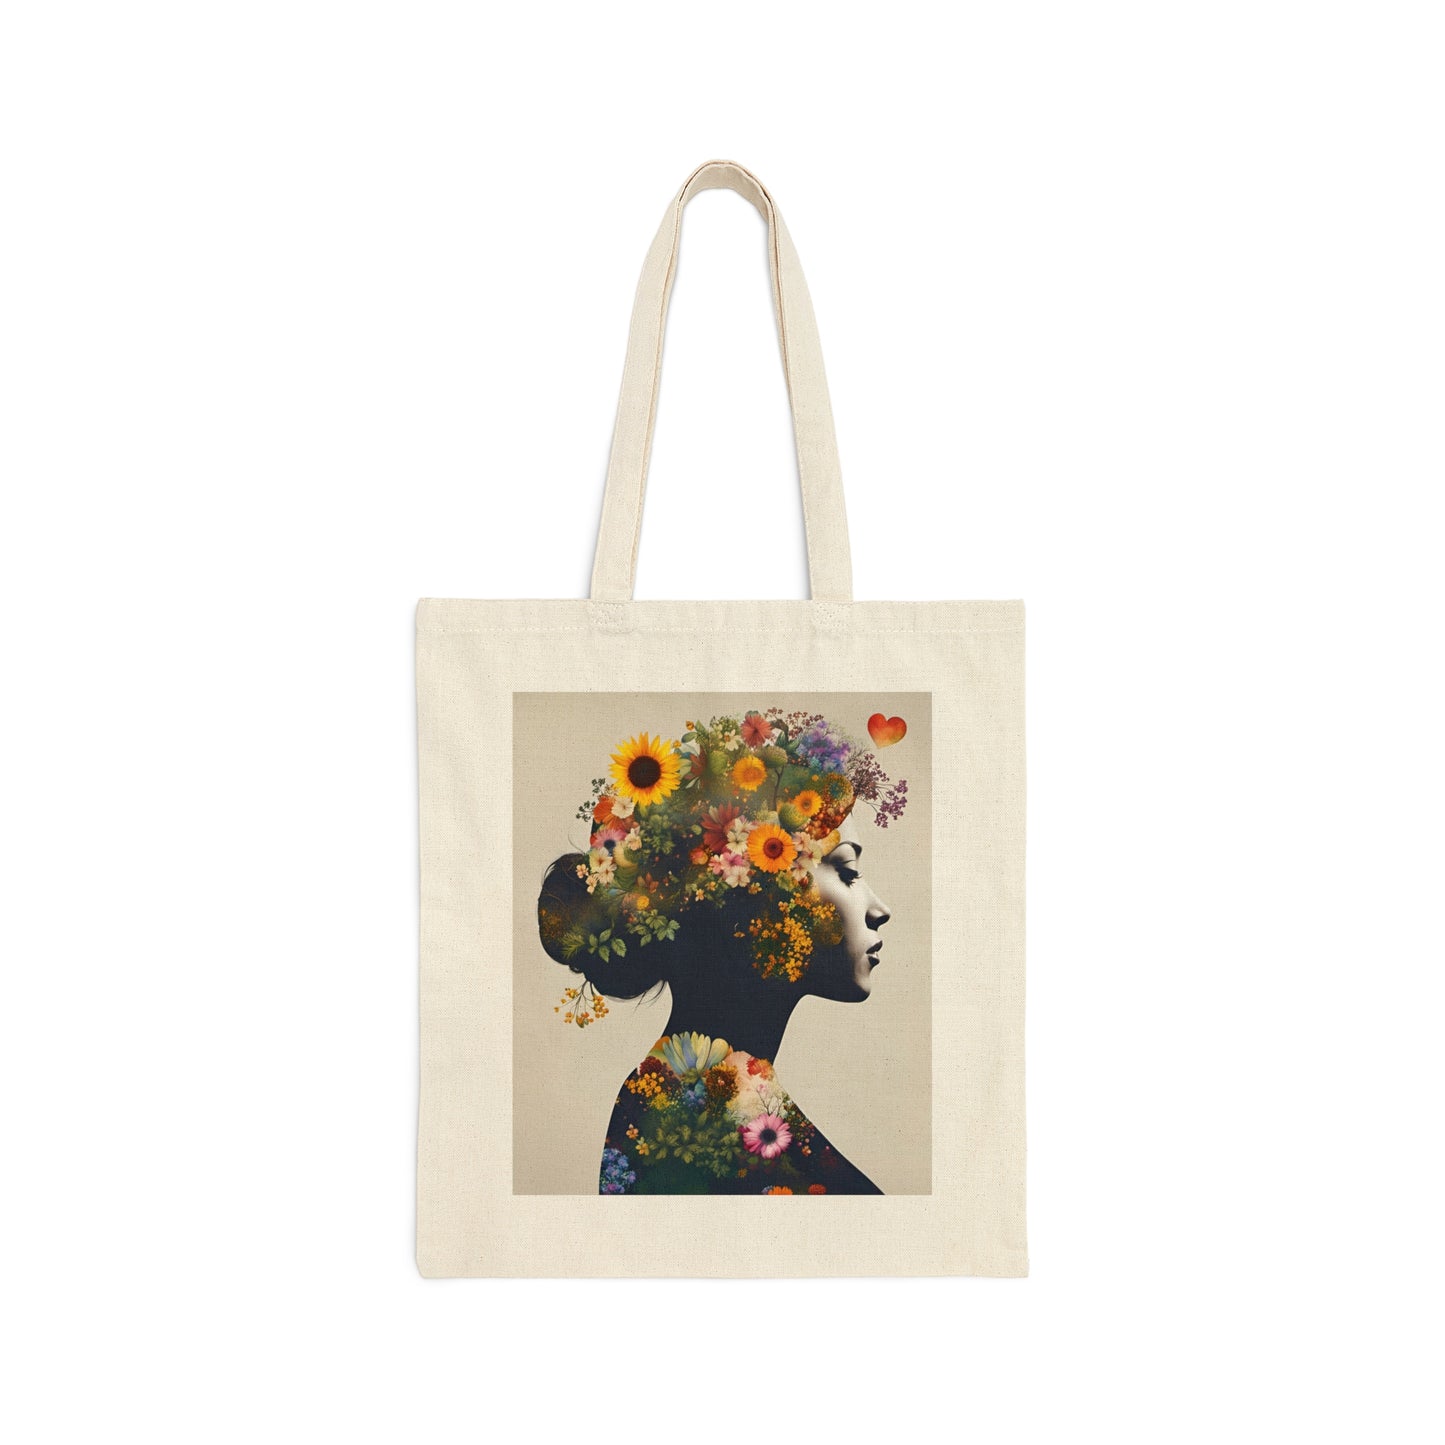 Floral Woman Cotton Canvas Tote Bag Limited Edition